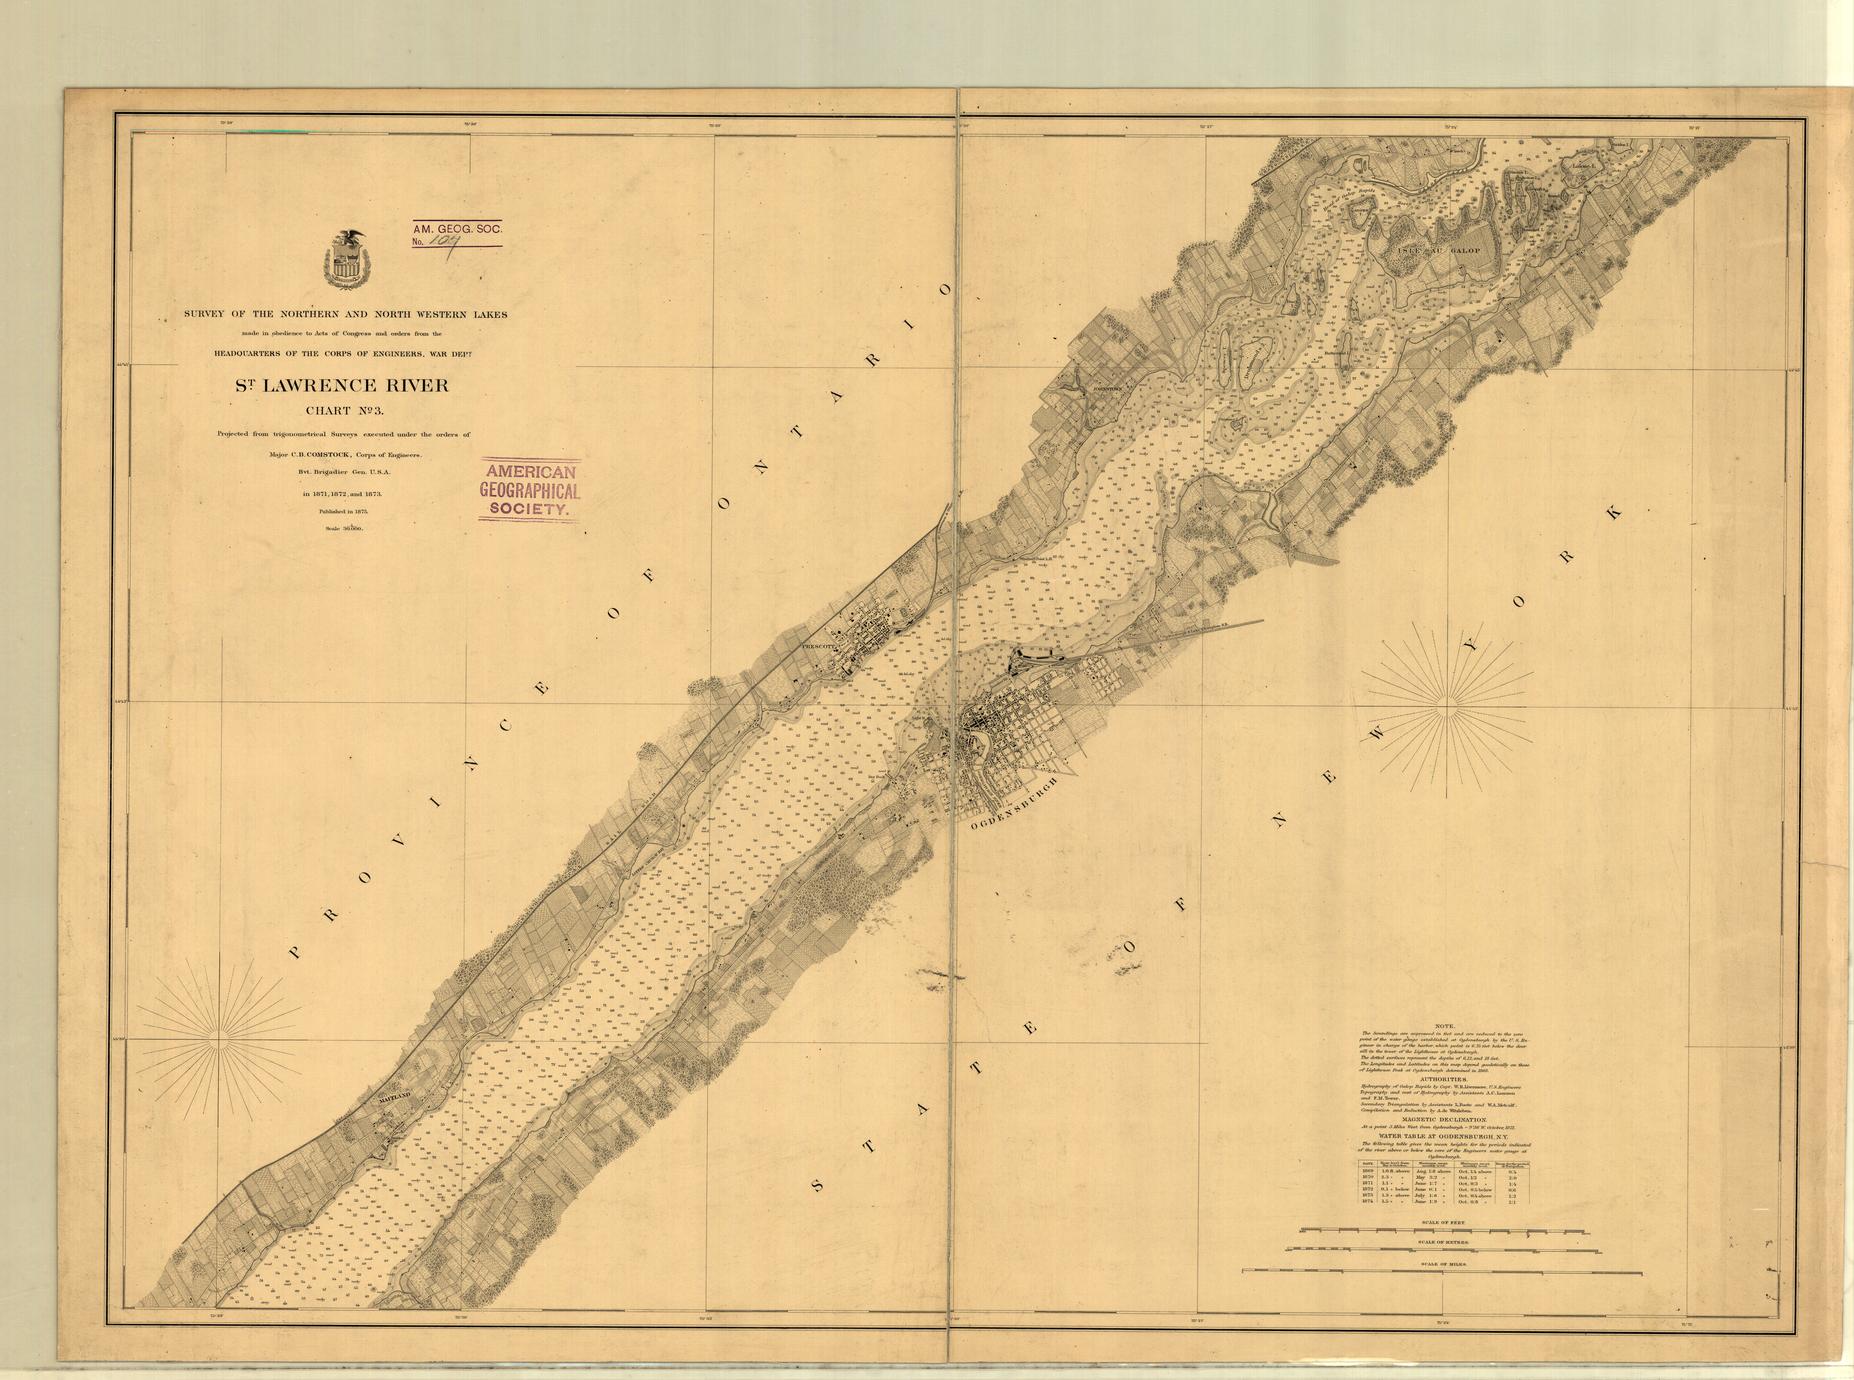 St. Lawrence River chart no. 3